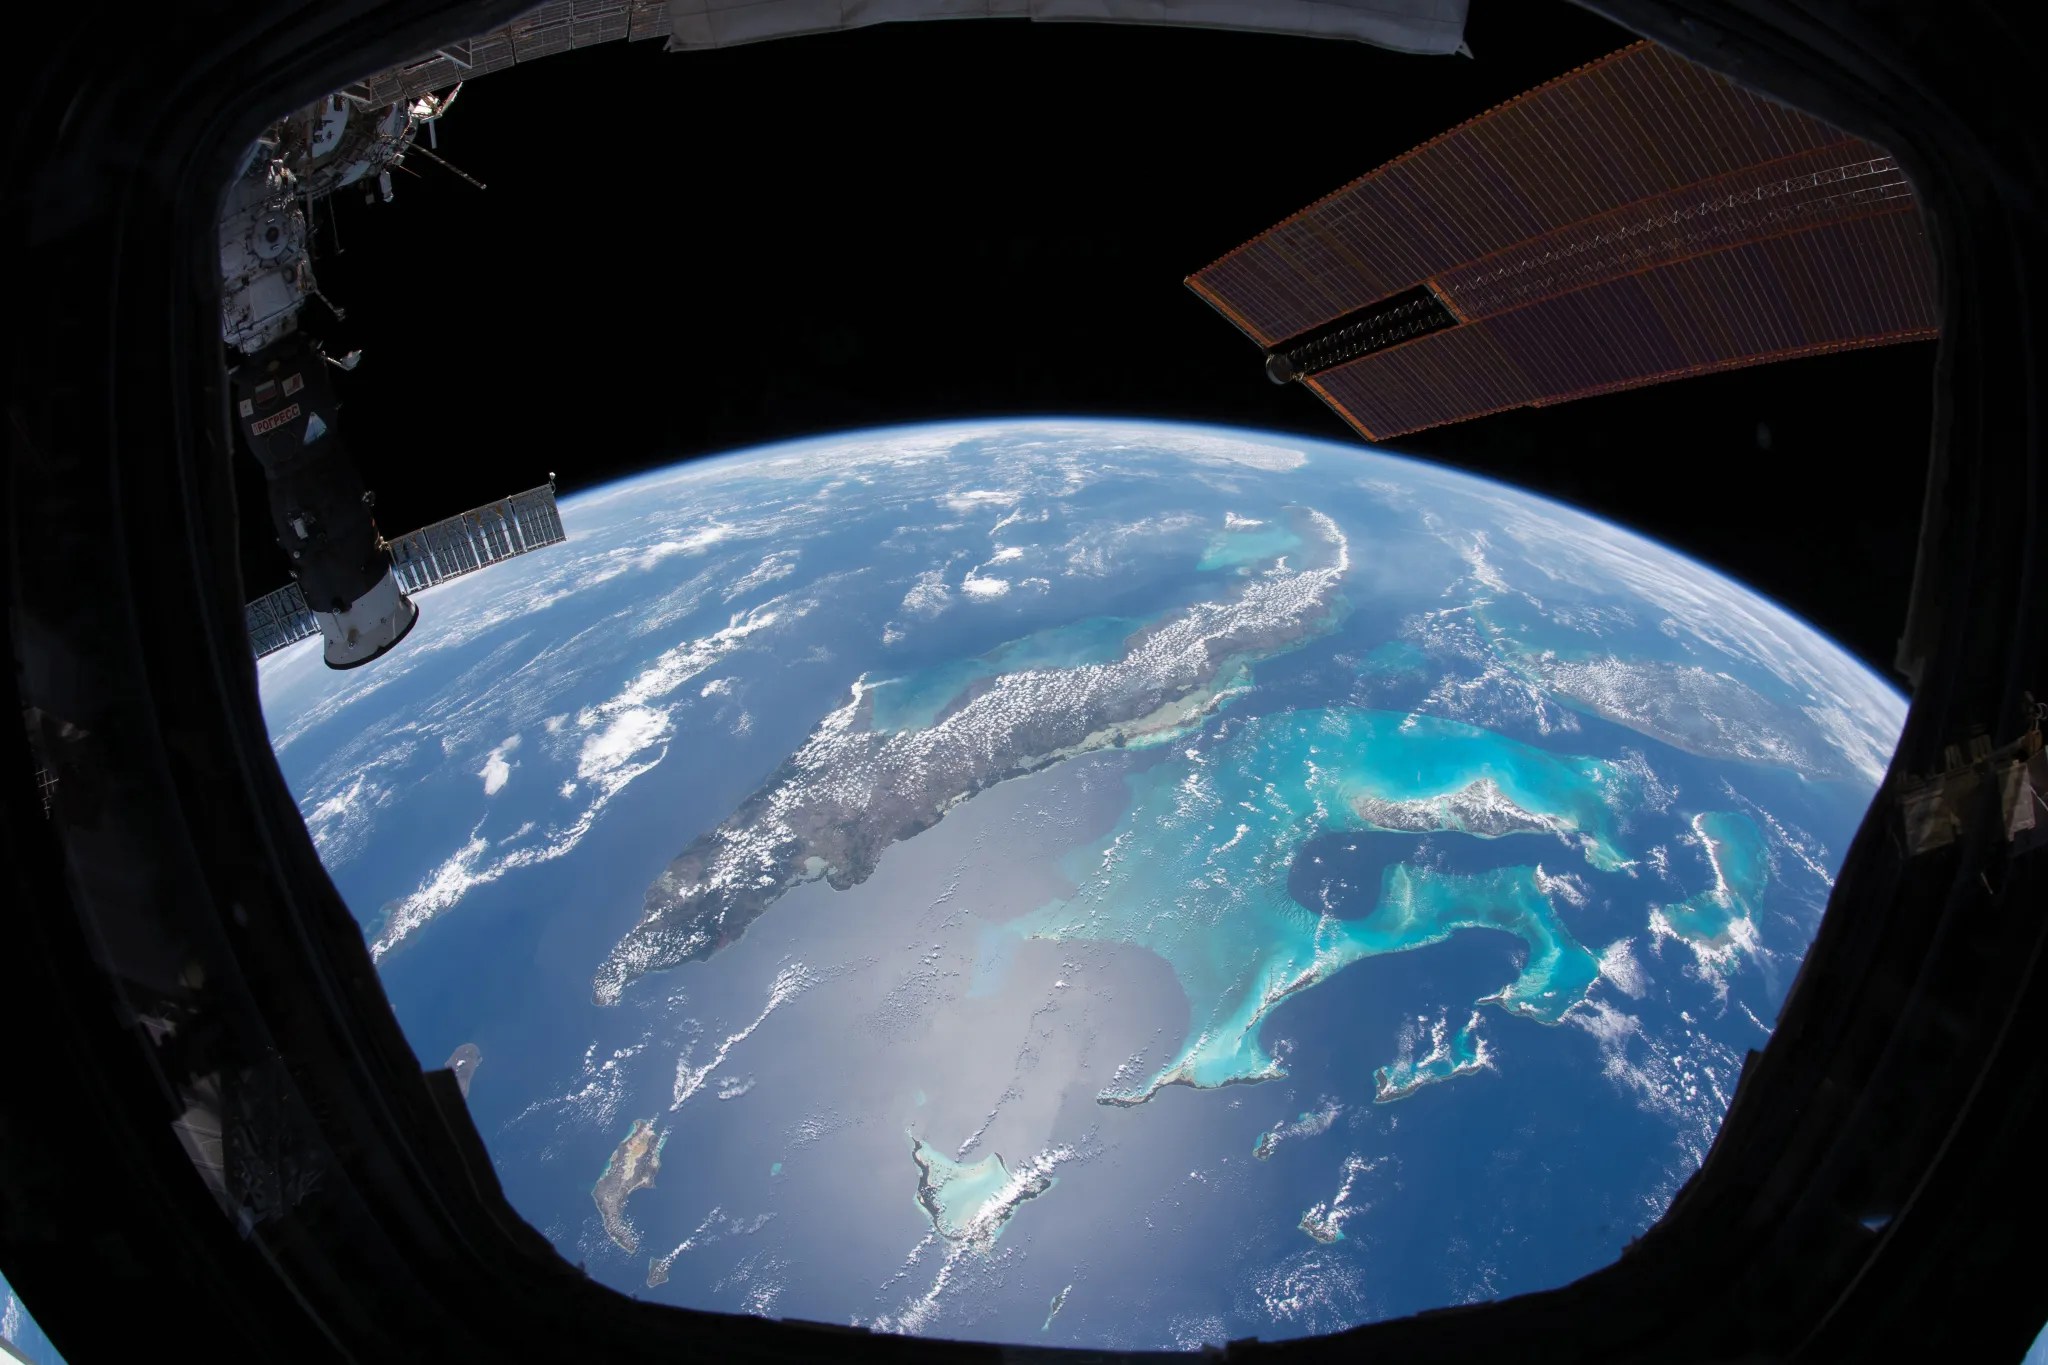 A photograph of Earth from the International Space Station. At the top of the image, the Earth is curved has a blue line dividing it from black-colored space. At the middle and bottom of the image, the Earth has blue and turquoise-colored water around various green islands. On the sides of the image are various instruments on the space station.